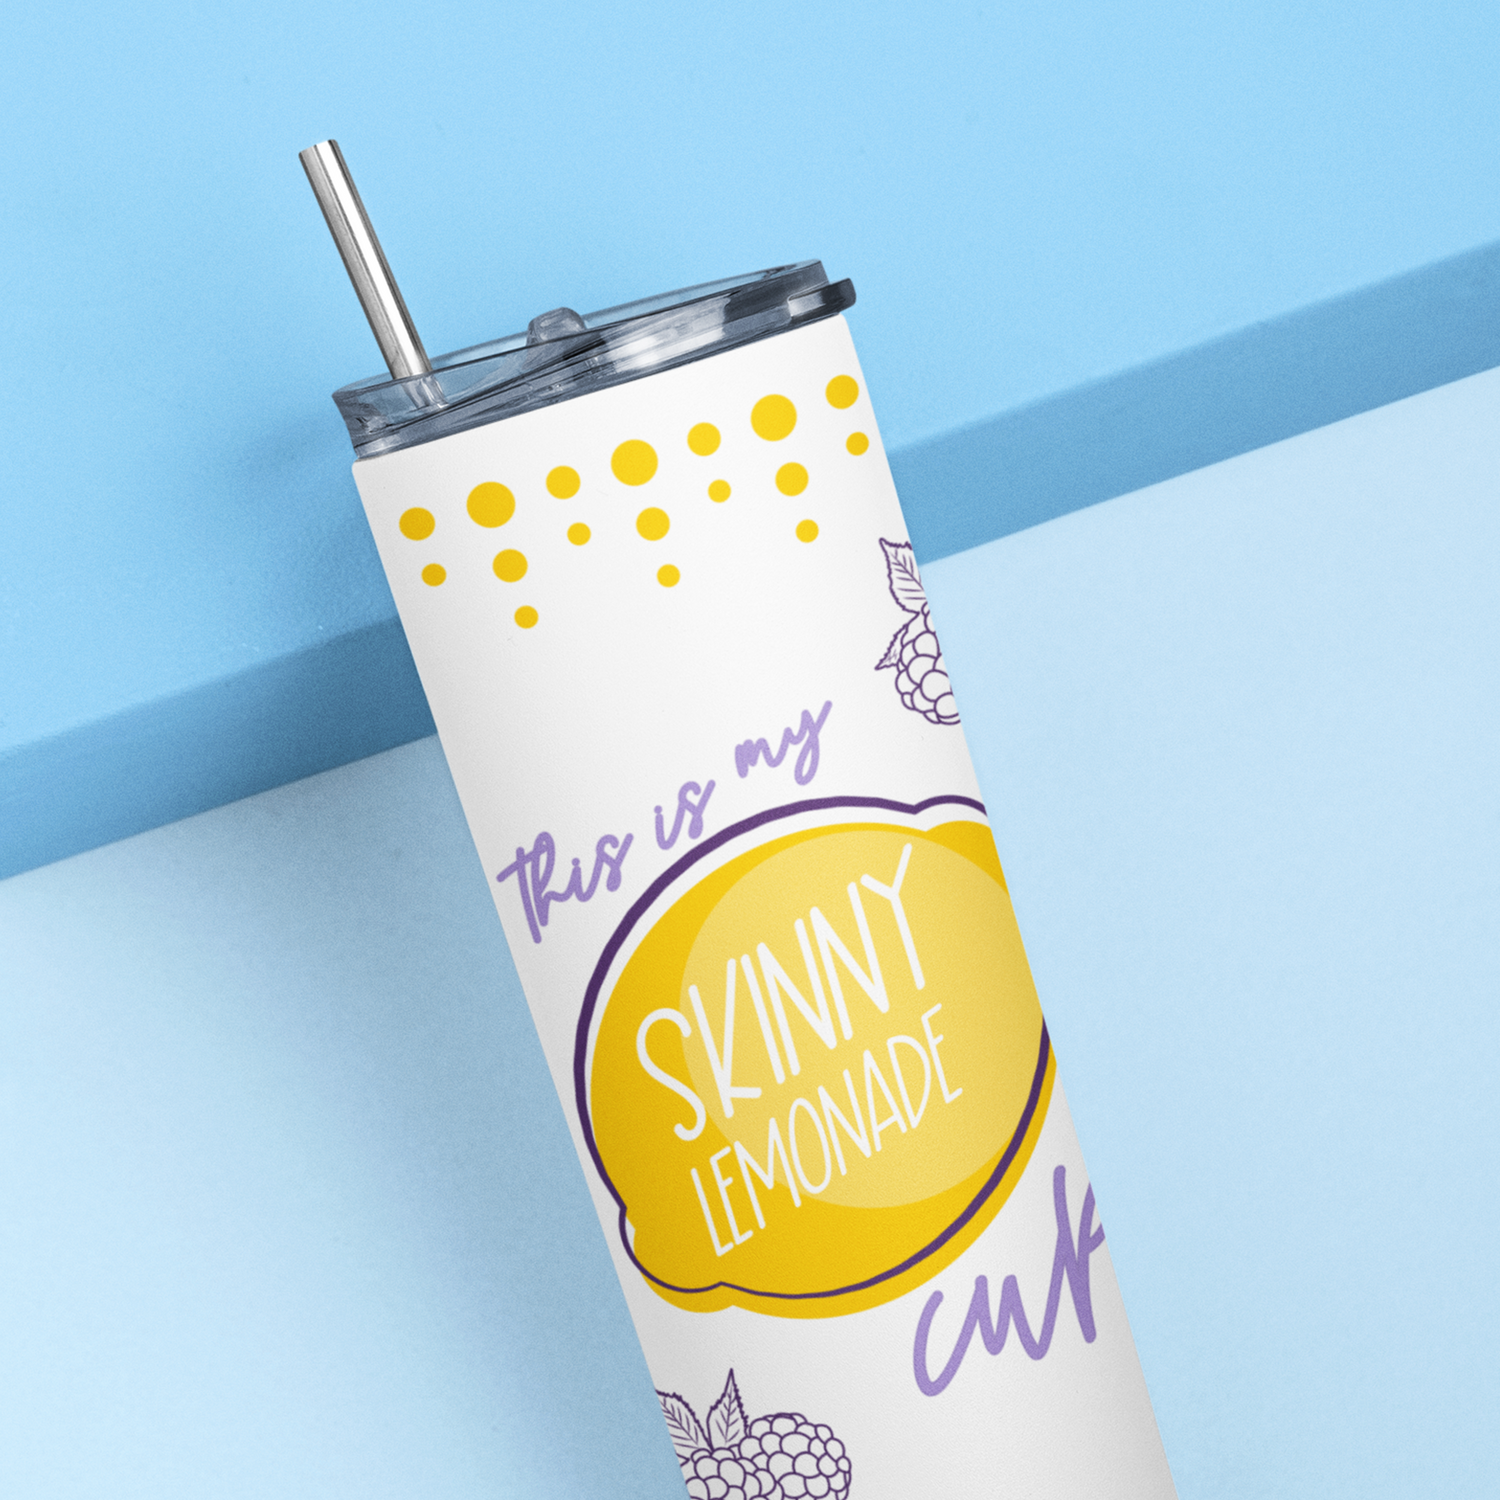 Image of a white tumbler with "This is my skinnny lemonade cup" and a picture of a lemon